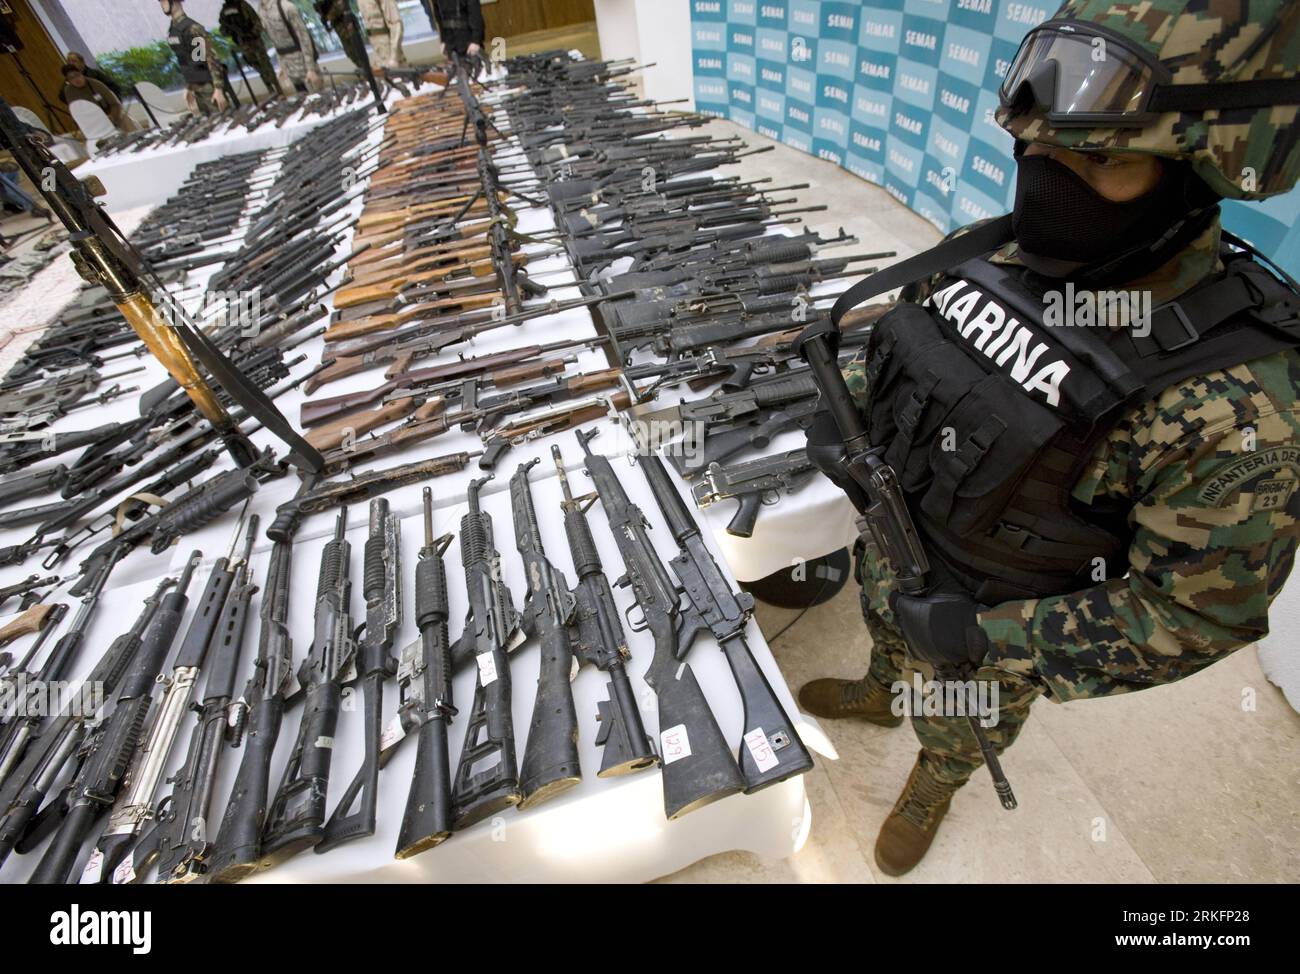 Bildnummer: 55444690  Datum: 09.06.2011  Copyright: imago/Xinhua (110609) -- MEXICO CITY, June 9, 2011 (Xinhua) --Navy Secretariat of Mexico SEMAR present to the media an arsenal of 204 weapons, 200 kg of cocaine and 500 apocryphal uniform seized from the cartel Los Zetas in separated operations in the states of Nuevo Leon and Coahuila, in Mexico City, capital of Mexico, June 9, 2011. Also presented to the media were five alleged members of the criminal organization. (Xinhua/David de la Paz) MEXICO-MEXICO CITY-SECURITY-ARSENAL SEIZED PUBLICATIONxNOTxINxCHN Gesellschaft Mexiko Waffenfund xcb 20 Stock Photo